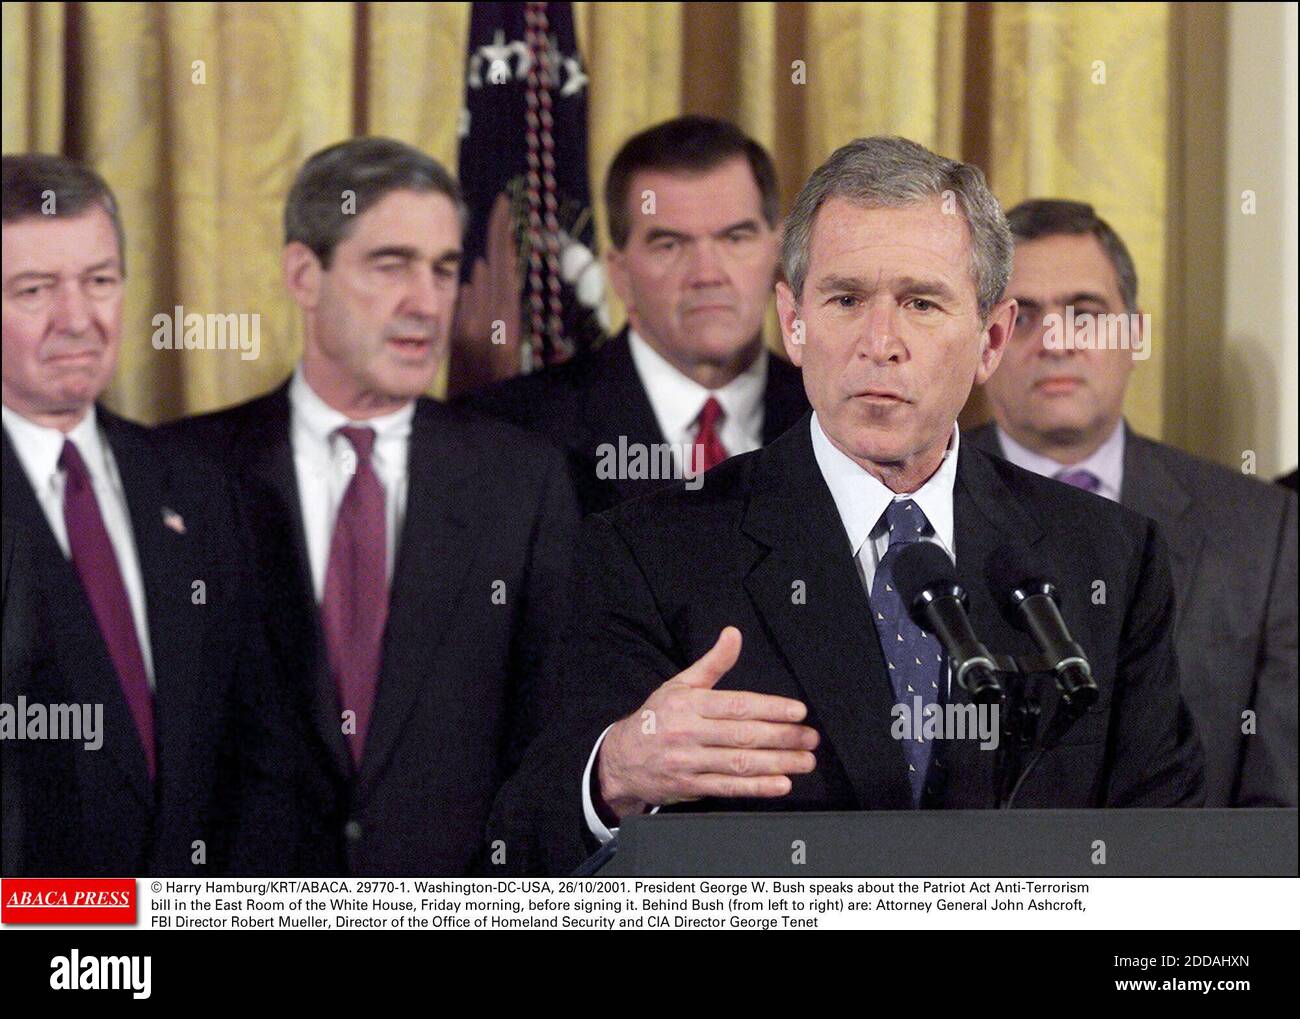 NO FILM, NO VIDEO, NO TV, NO DOCUMENTARY - © Harry Hamburg/KRT/ABACA. 29770-1. Washington-DC-USA, 26/10/2001. President George W. Bush speaks about the Patriot Act Anti-Terrorism bill in the East Room of the White House, Friday morning, before signing it. Behind Bush (from left to right) are: Atto Stock Photo